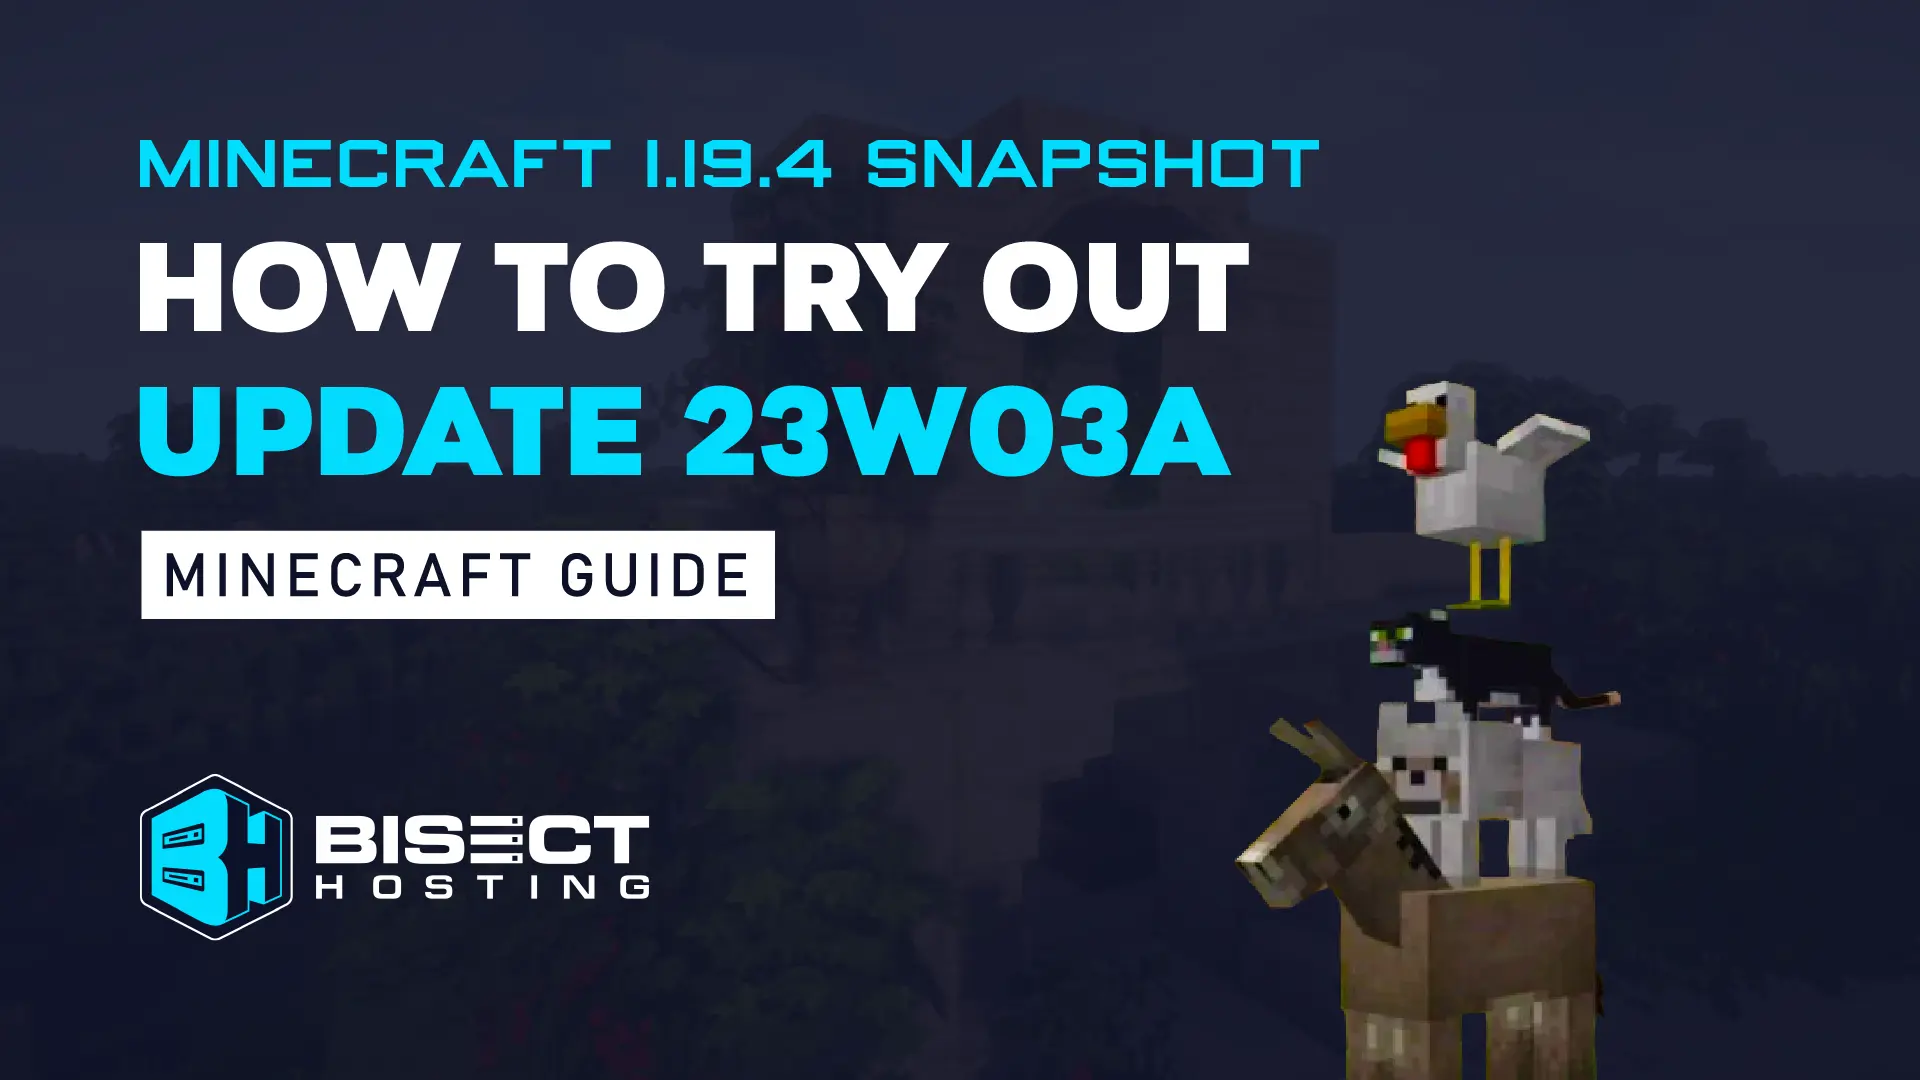 Minecraft 1.19.4 Snapshot: How to Try Out Update 23W03A